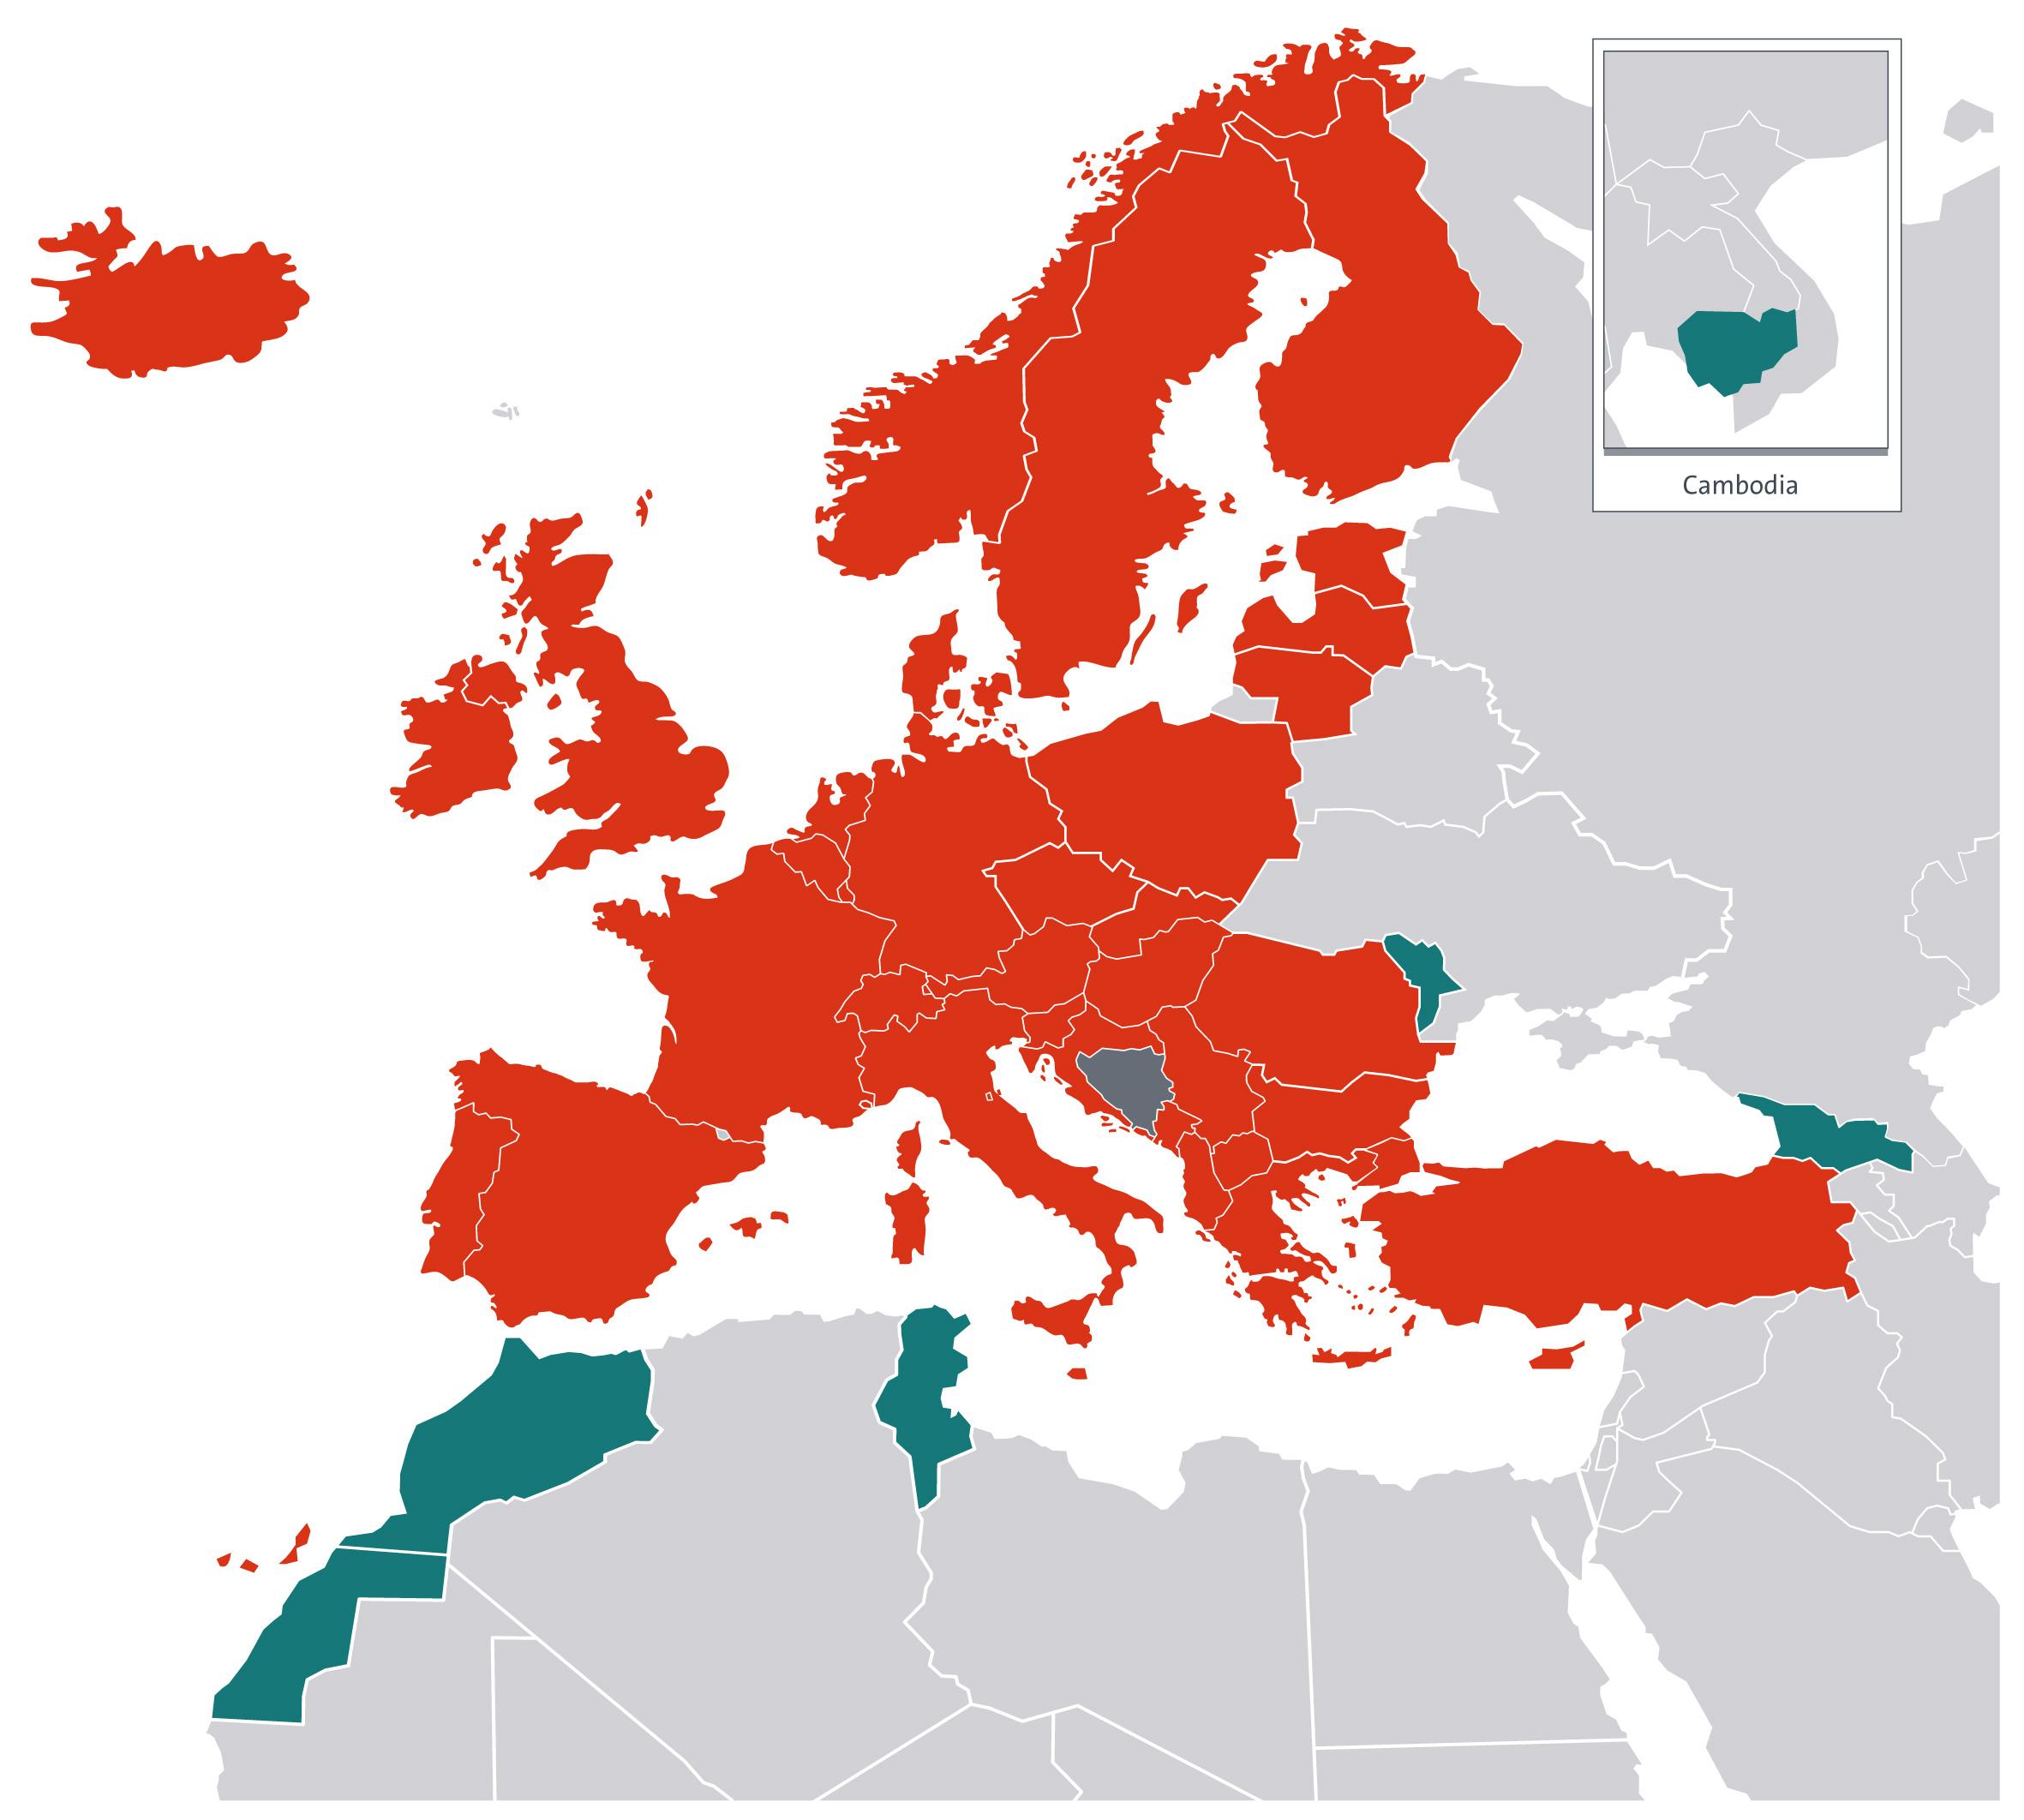 Map showing the member states in color red and extension states in blue